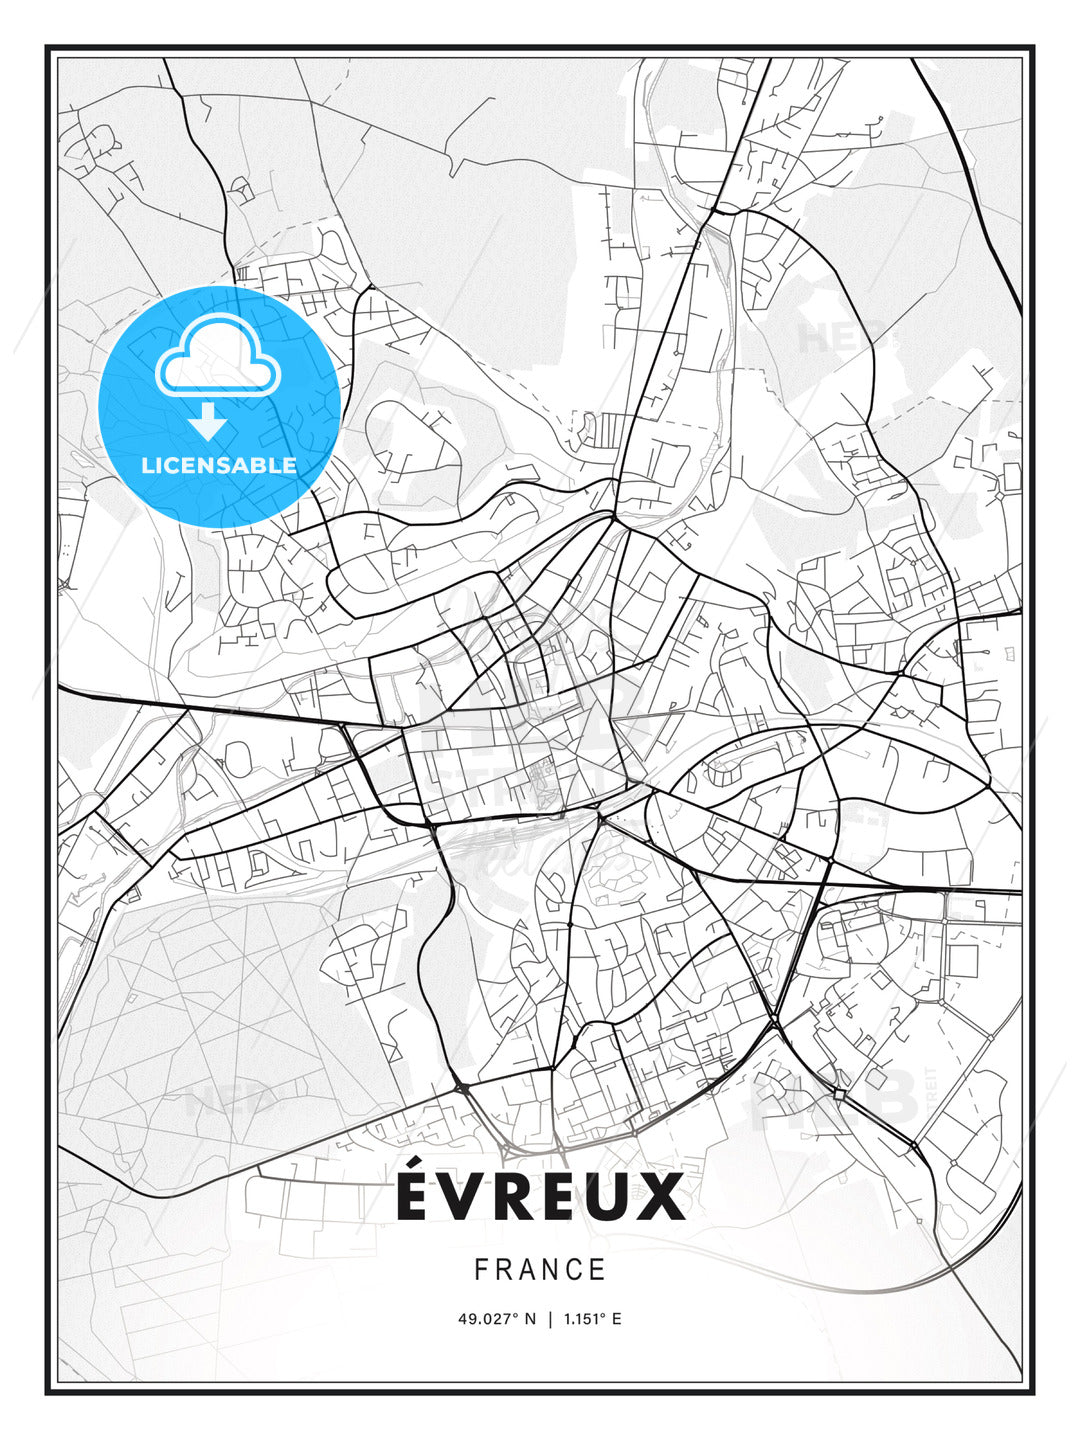 Évreux, France, Modern Print Template in Various Formats - HEBSTREITS Sketches